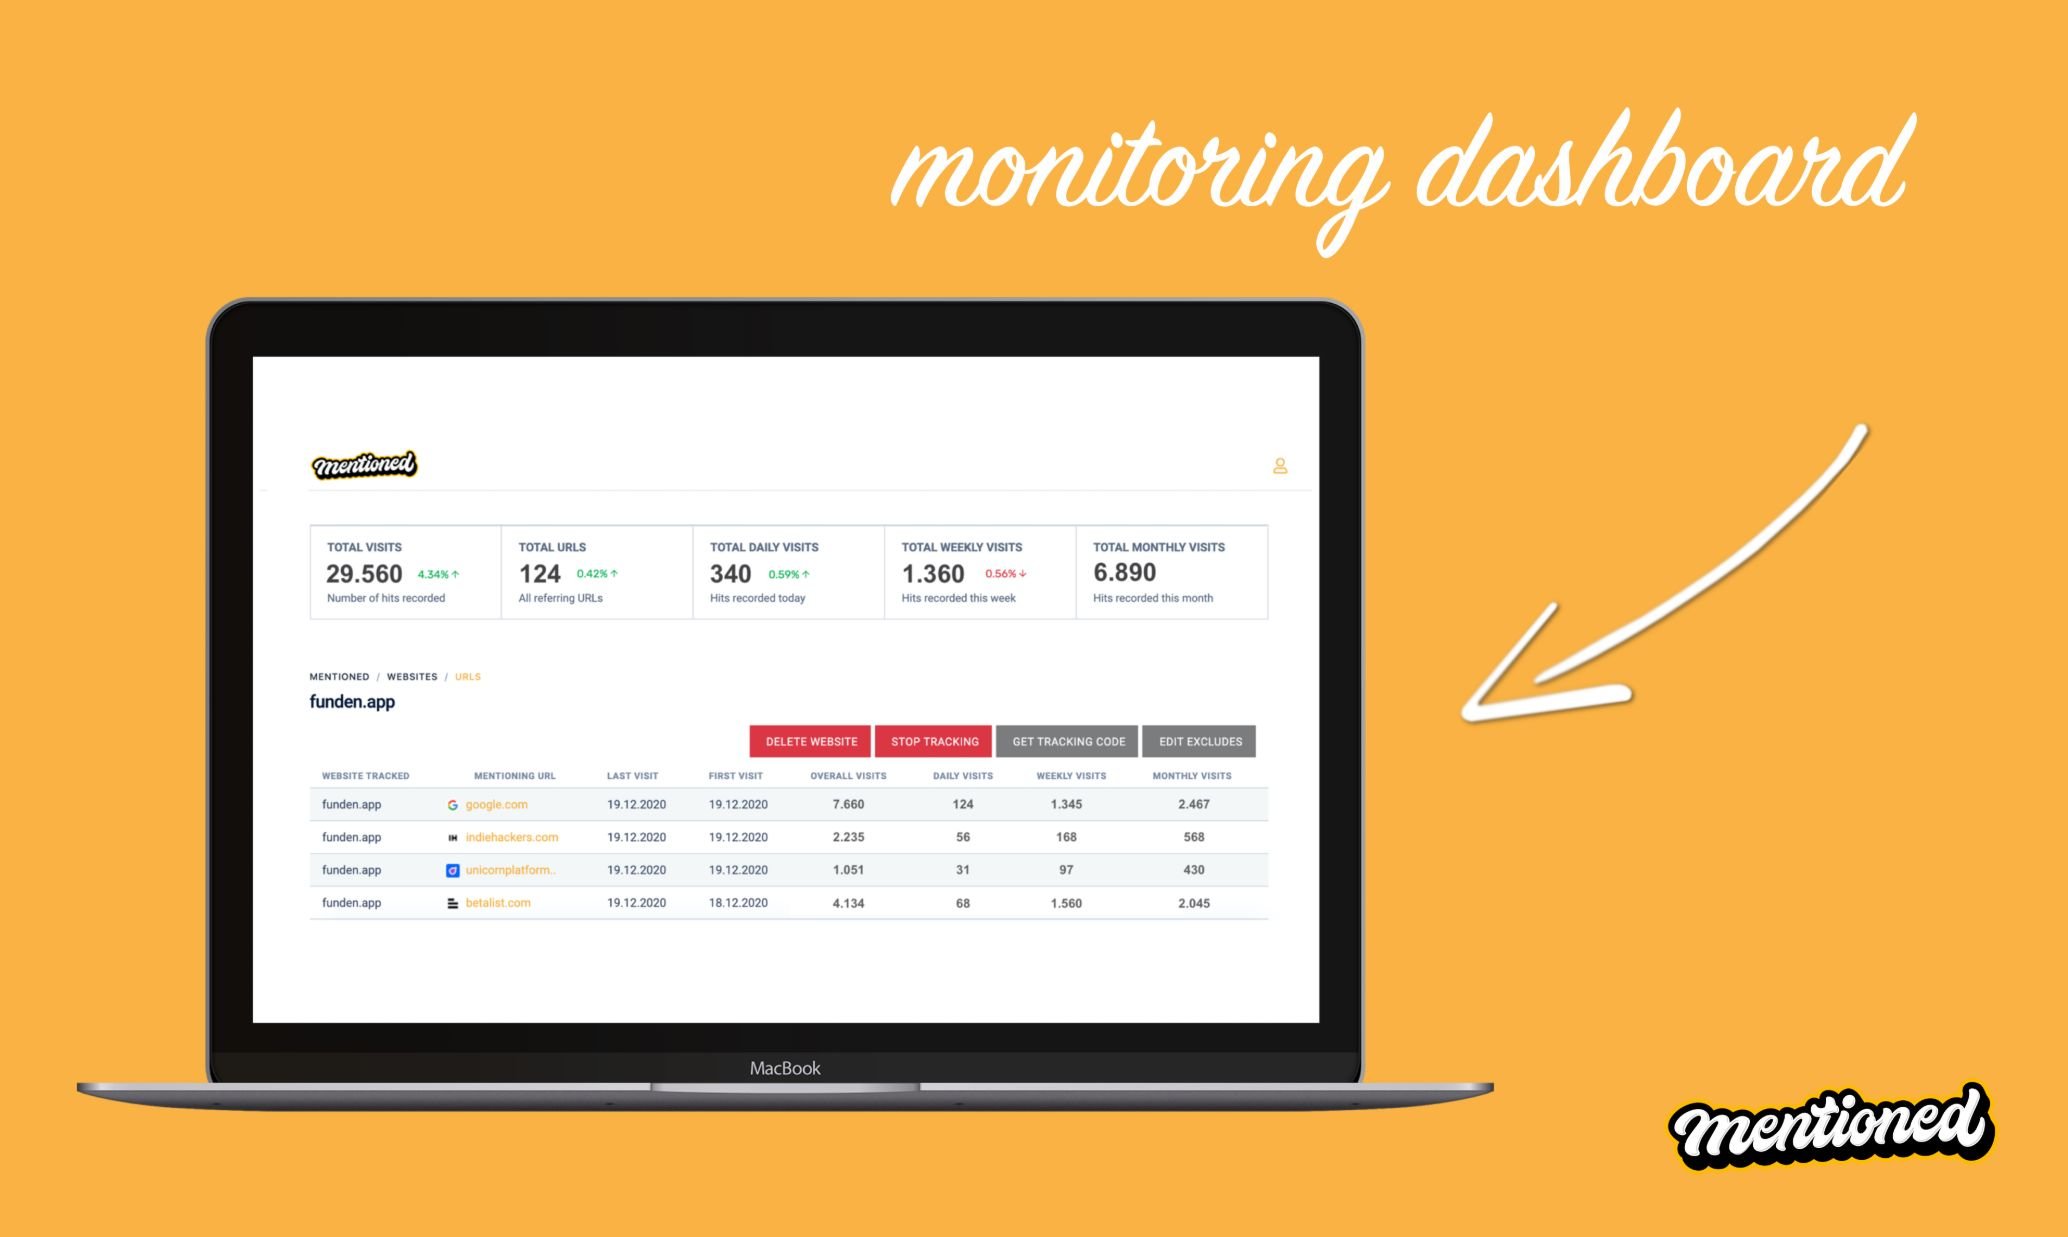 Mentioned App Analytics Monitoring Dashboard